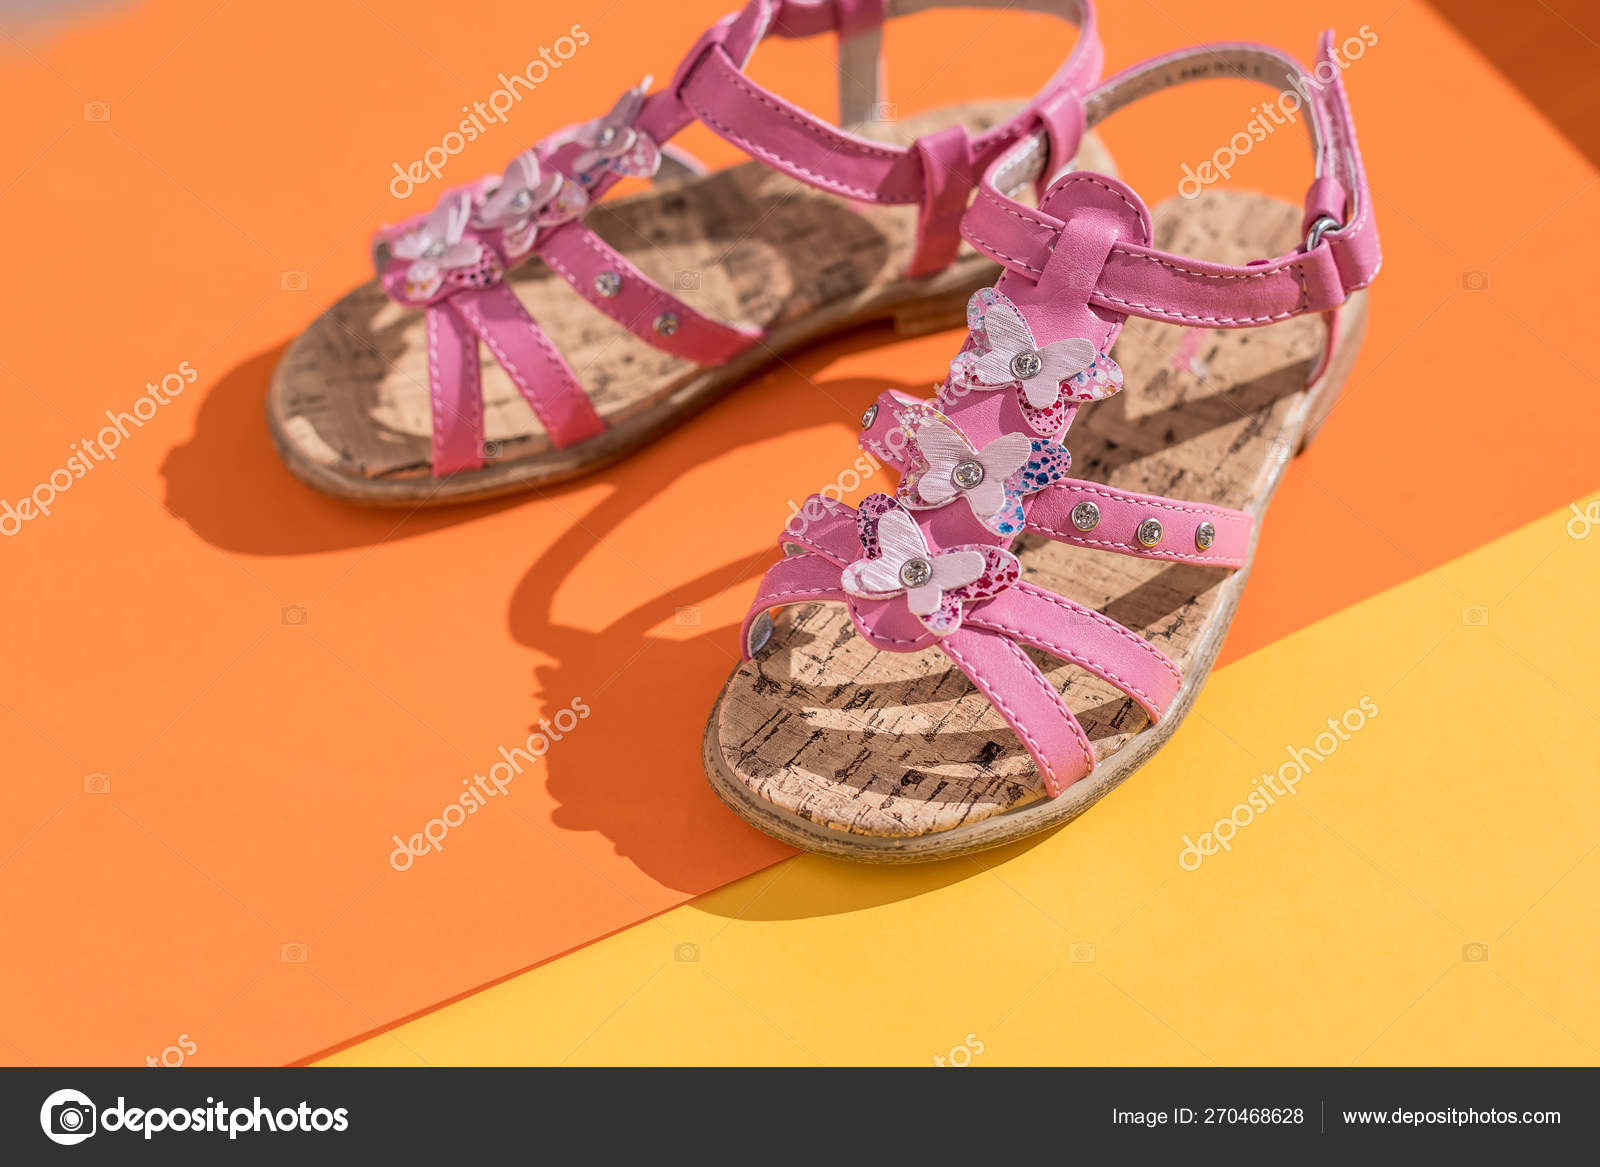 pink sandals for baby girl